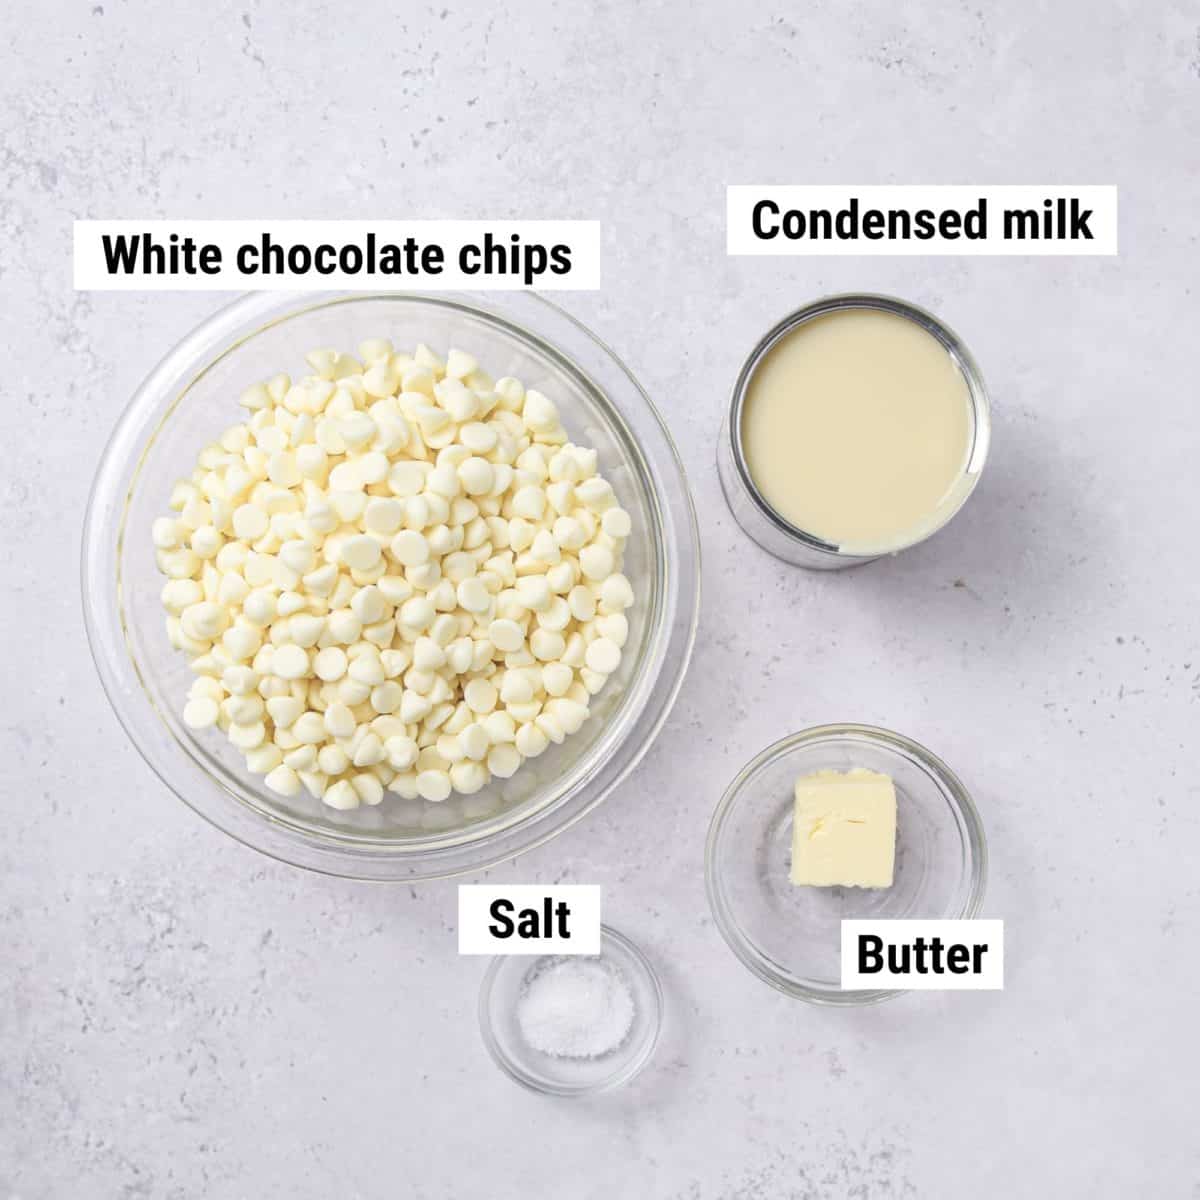 The ingredients used to make white chocolate fudge laid out on a table.